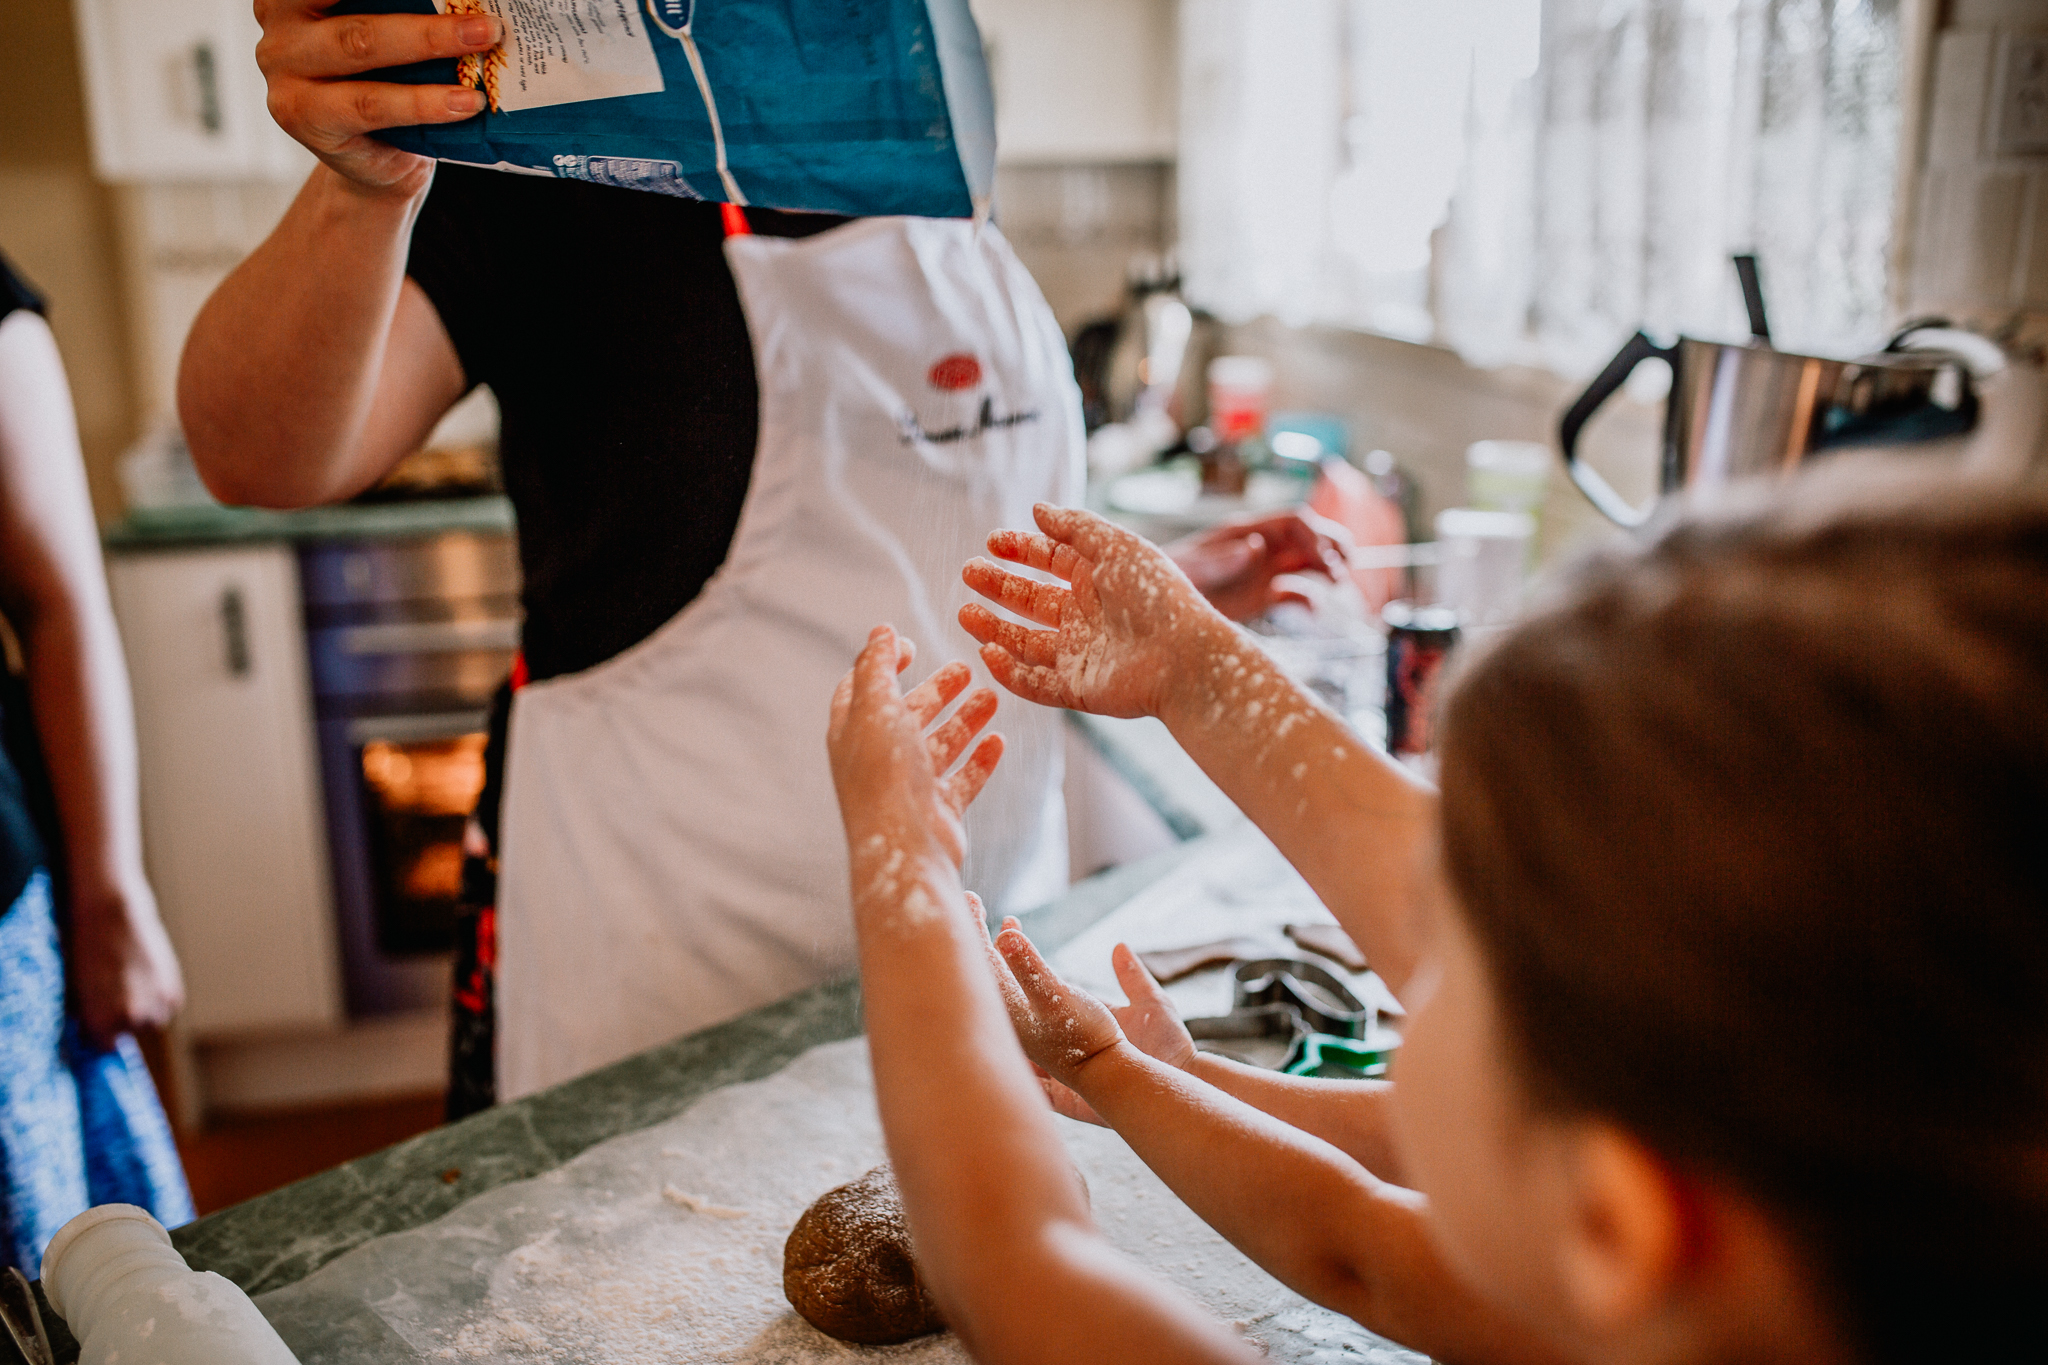 Christmas Baking, flour sprinkled on hands & bench | Image by Kylie Purtell Photos & Films